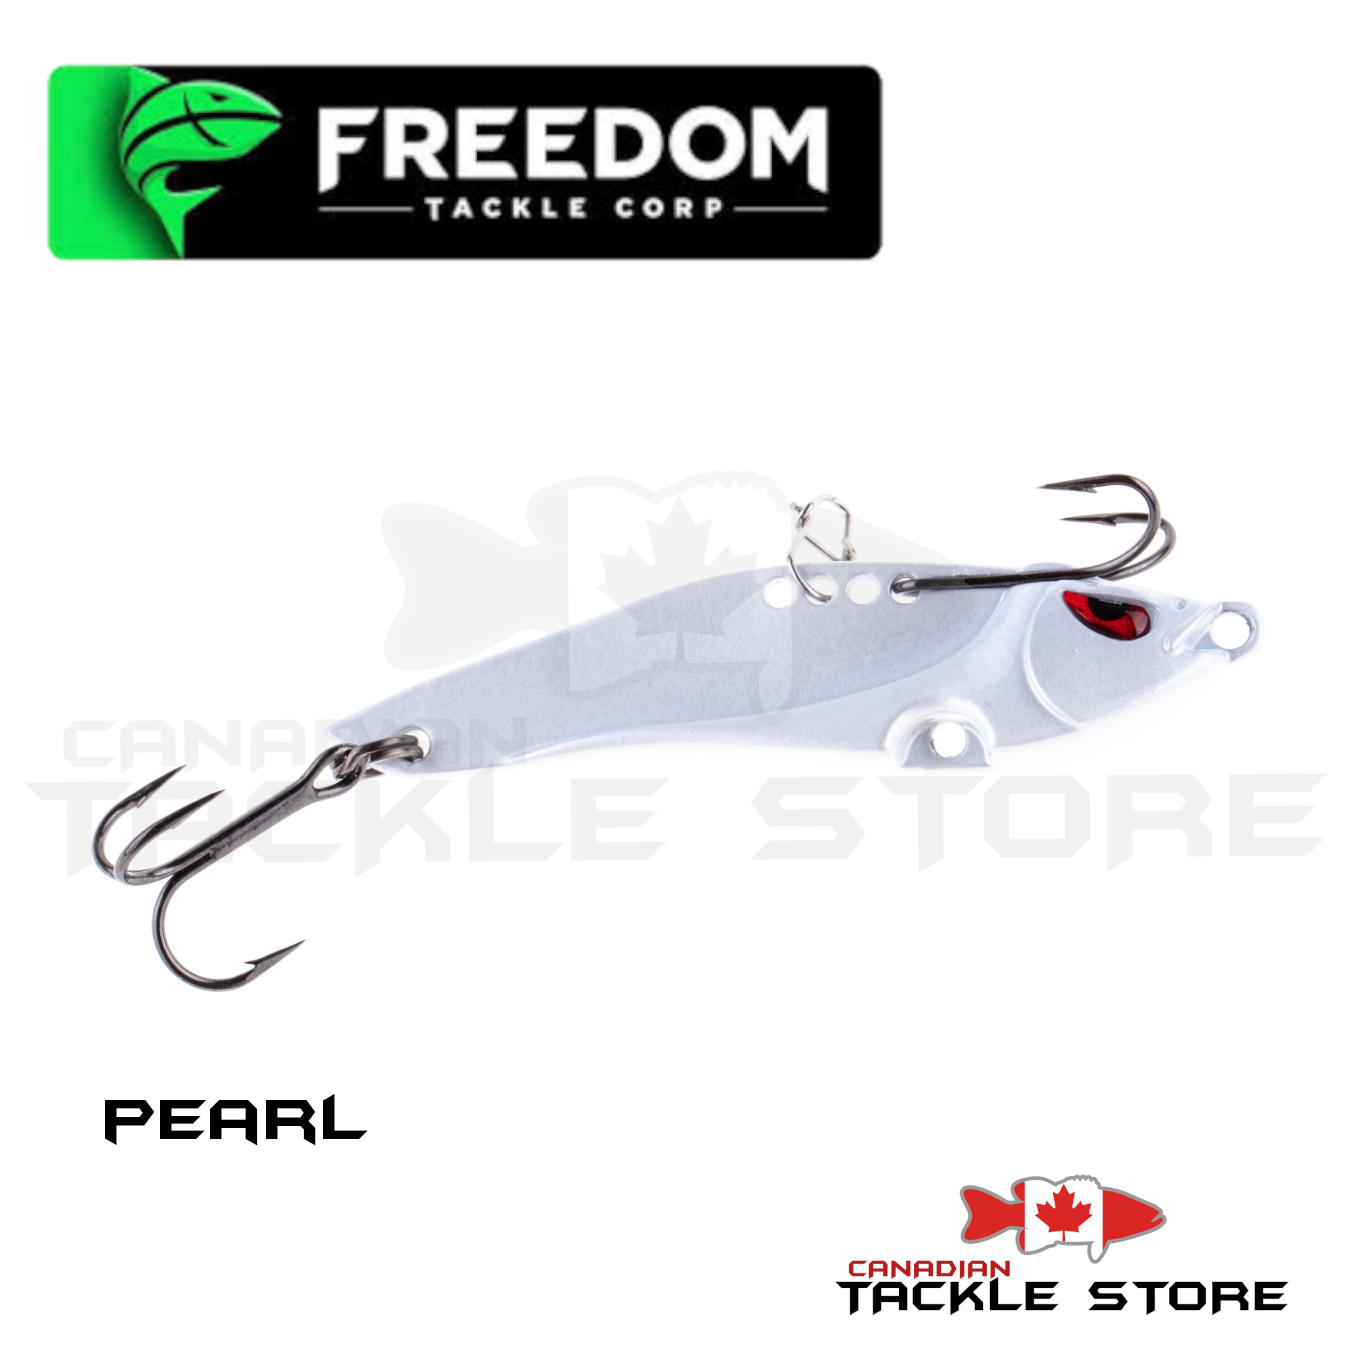 blade lures, blade lures Suppliers and Manufacturers at